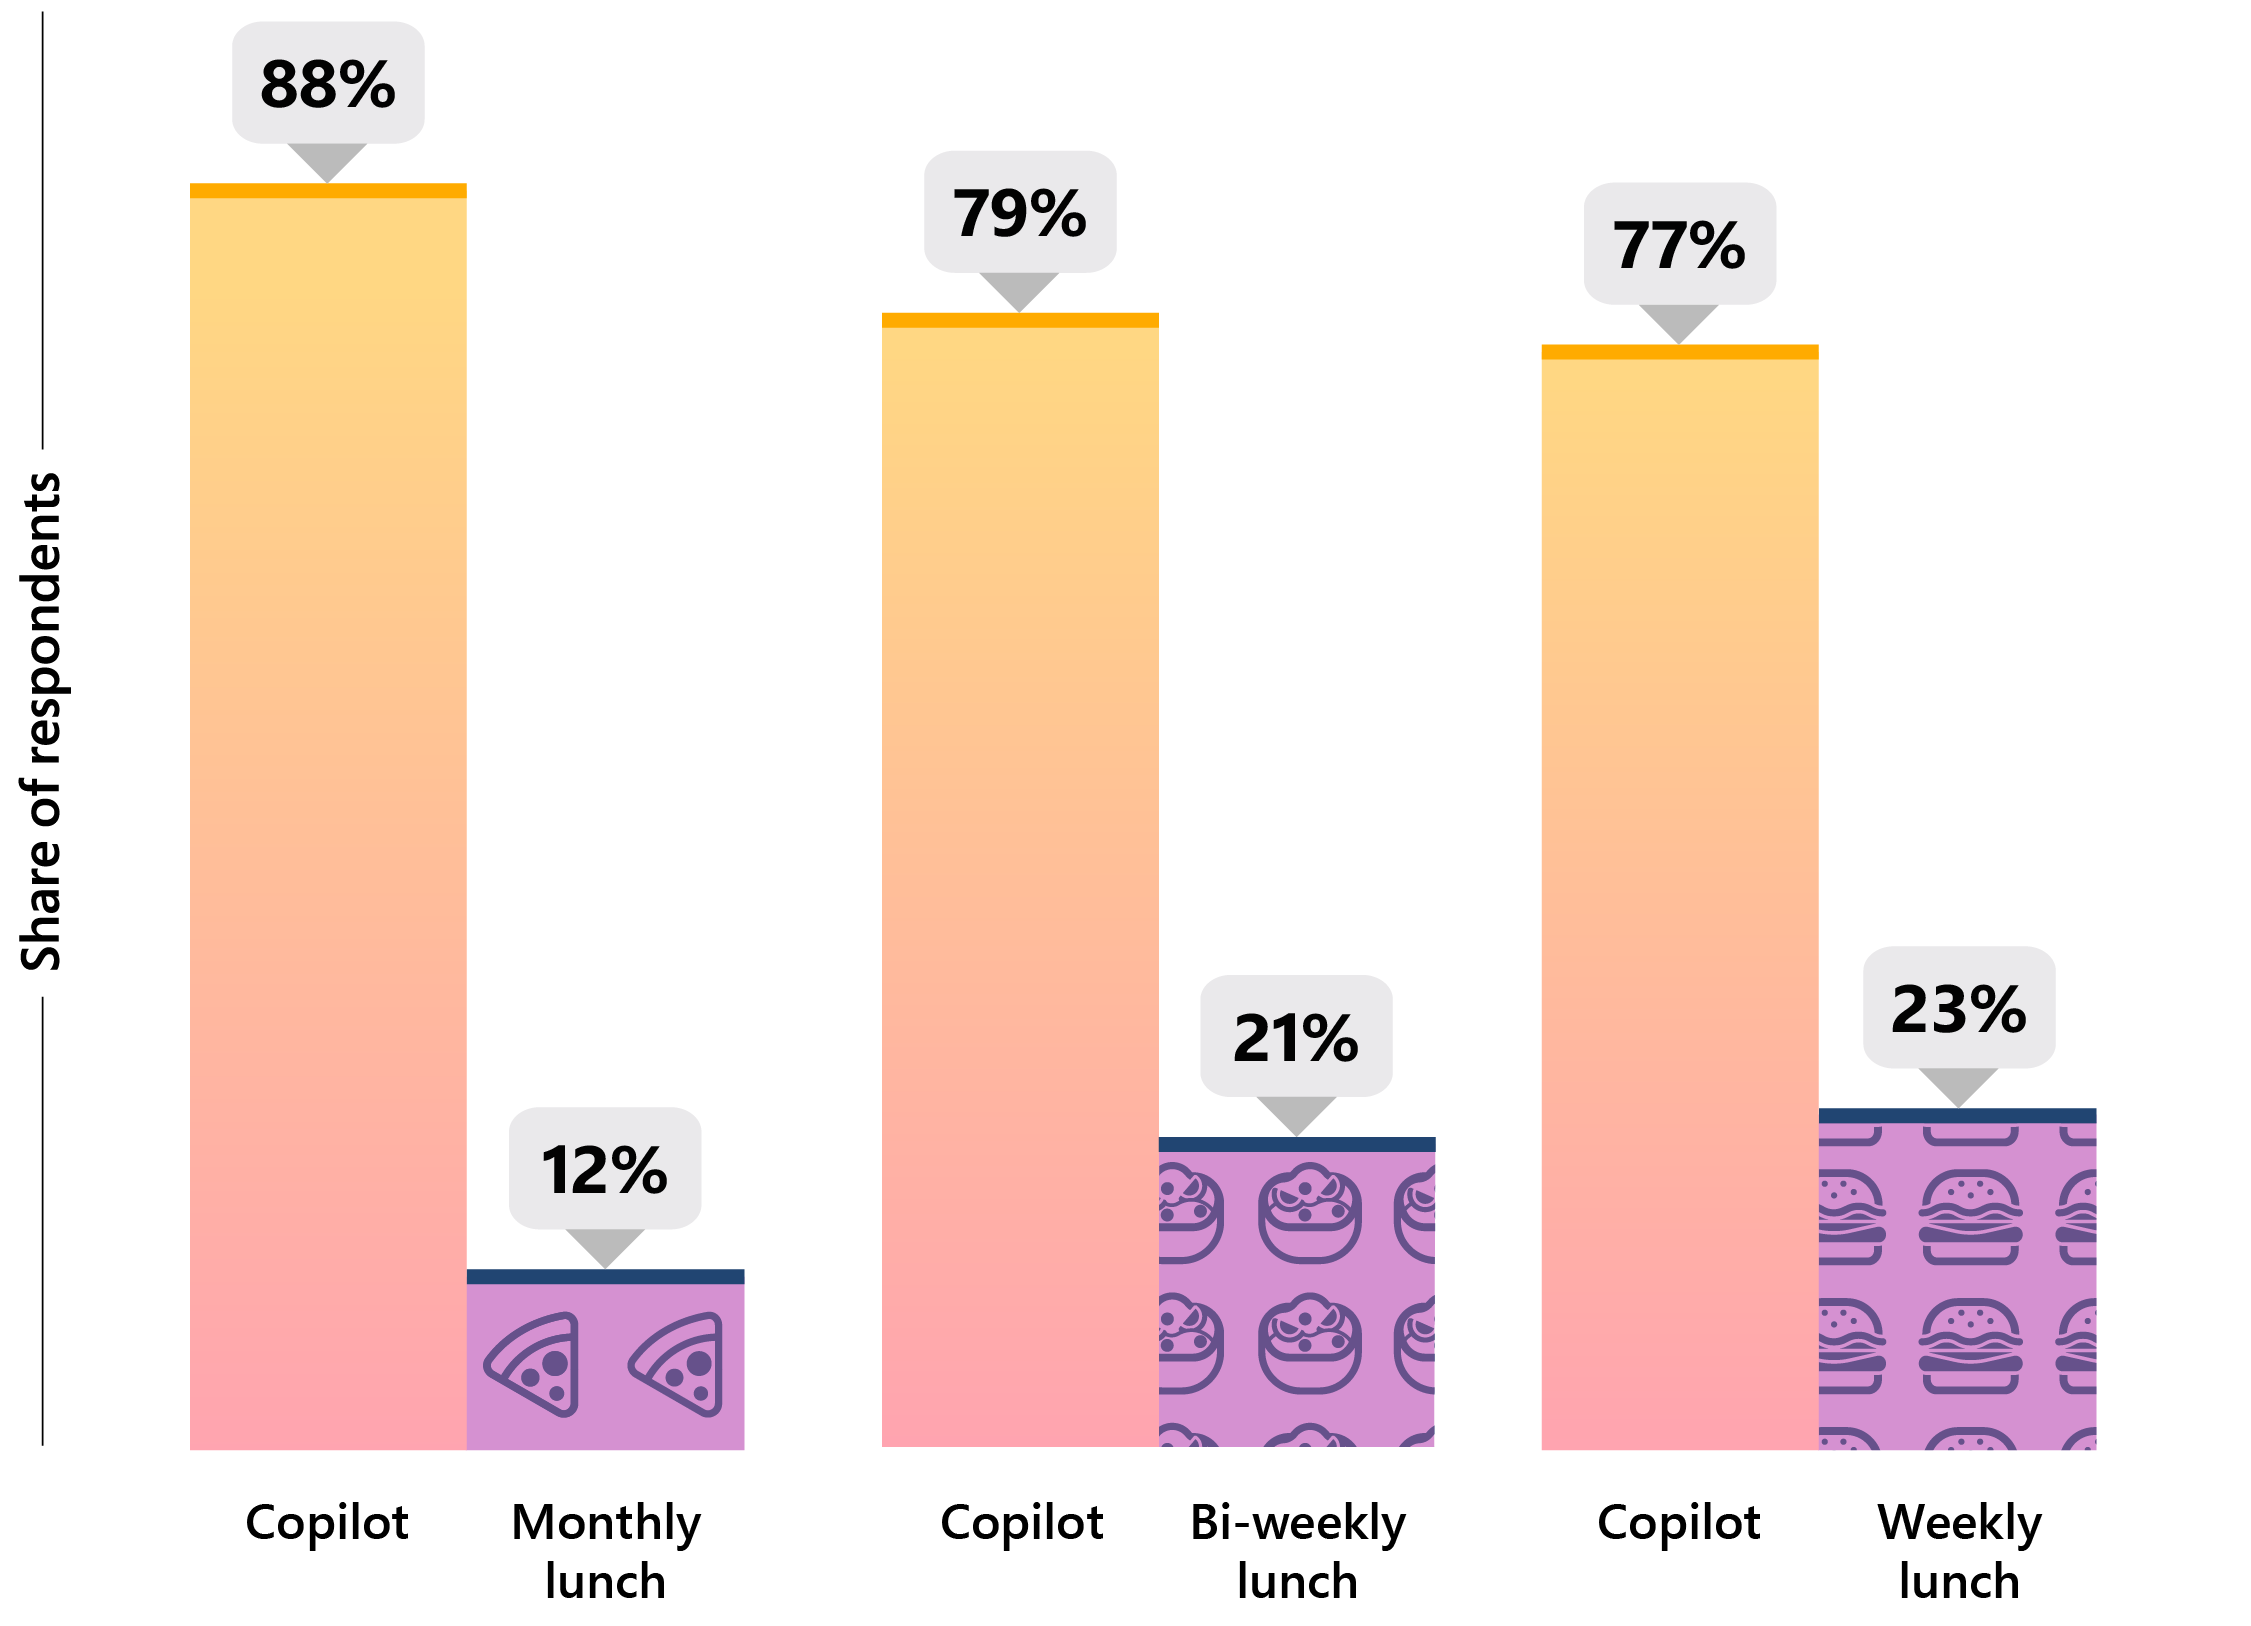 Bar chart showing that Copilot users would choose access to Copilot over a monthly lunch (88% vs. 12%); a bi-weekly lunch (79% vs. 21%); and a weekly free lunch (77% vs. 23%).